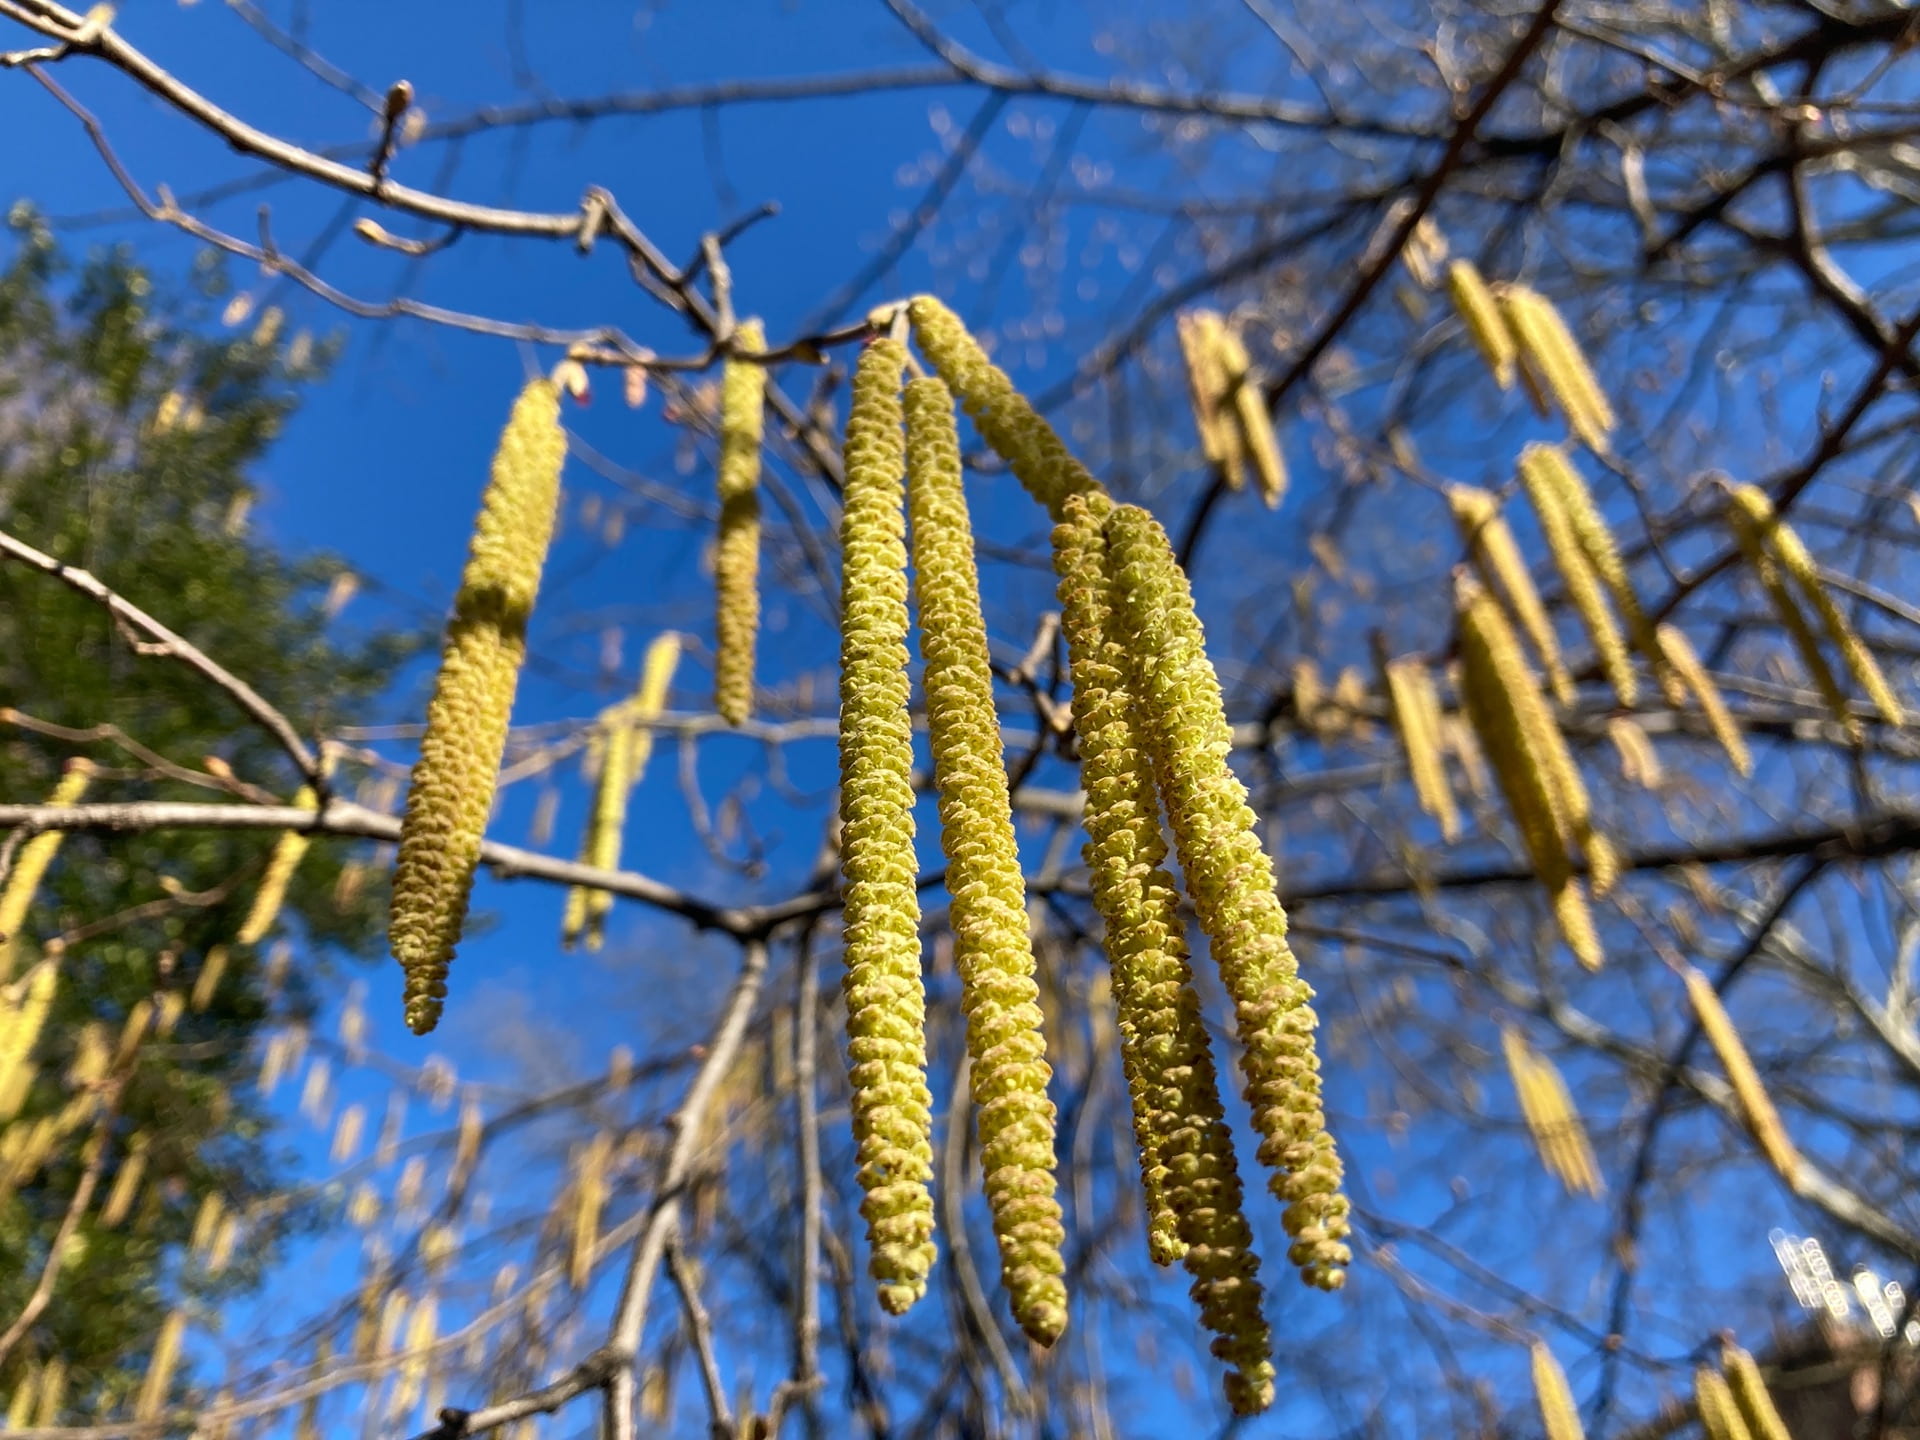 Corylus avellana flowers sway gracefully in the wind.